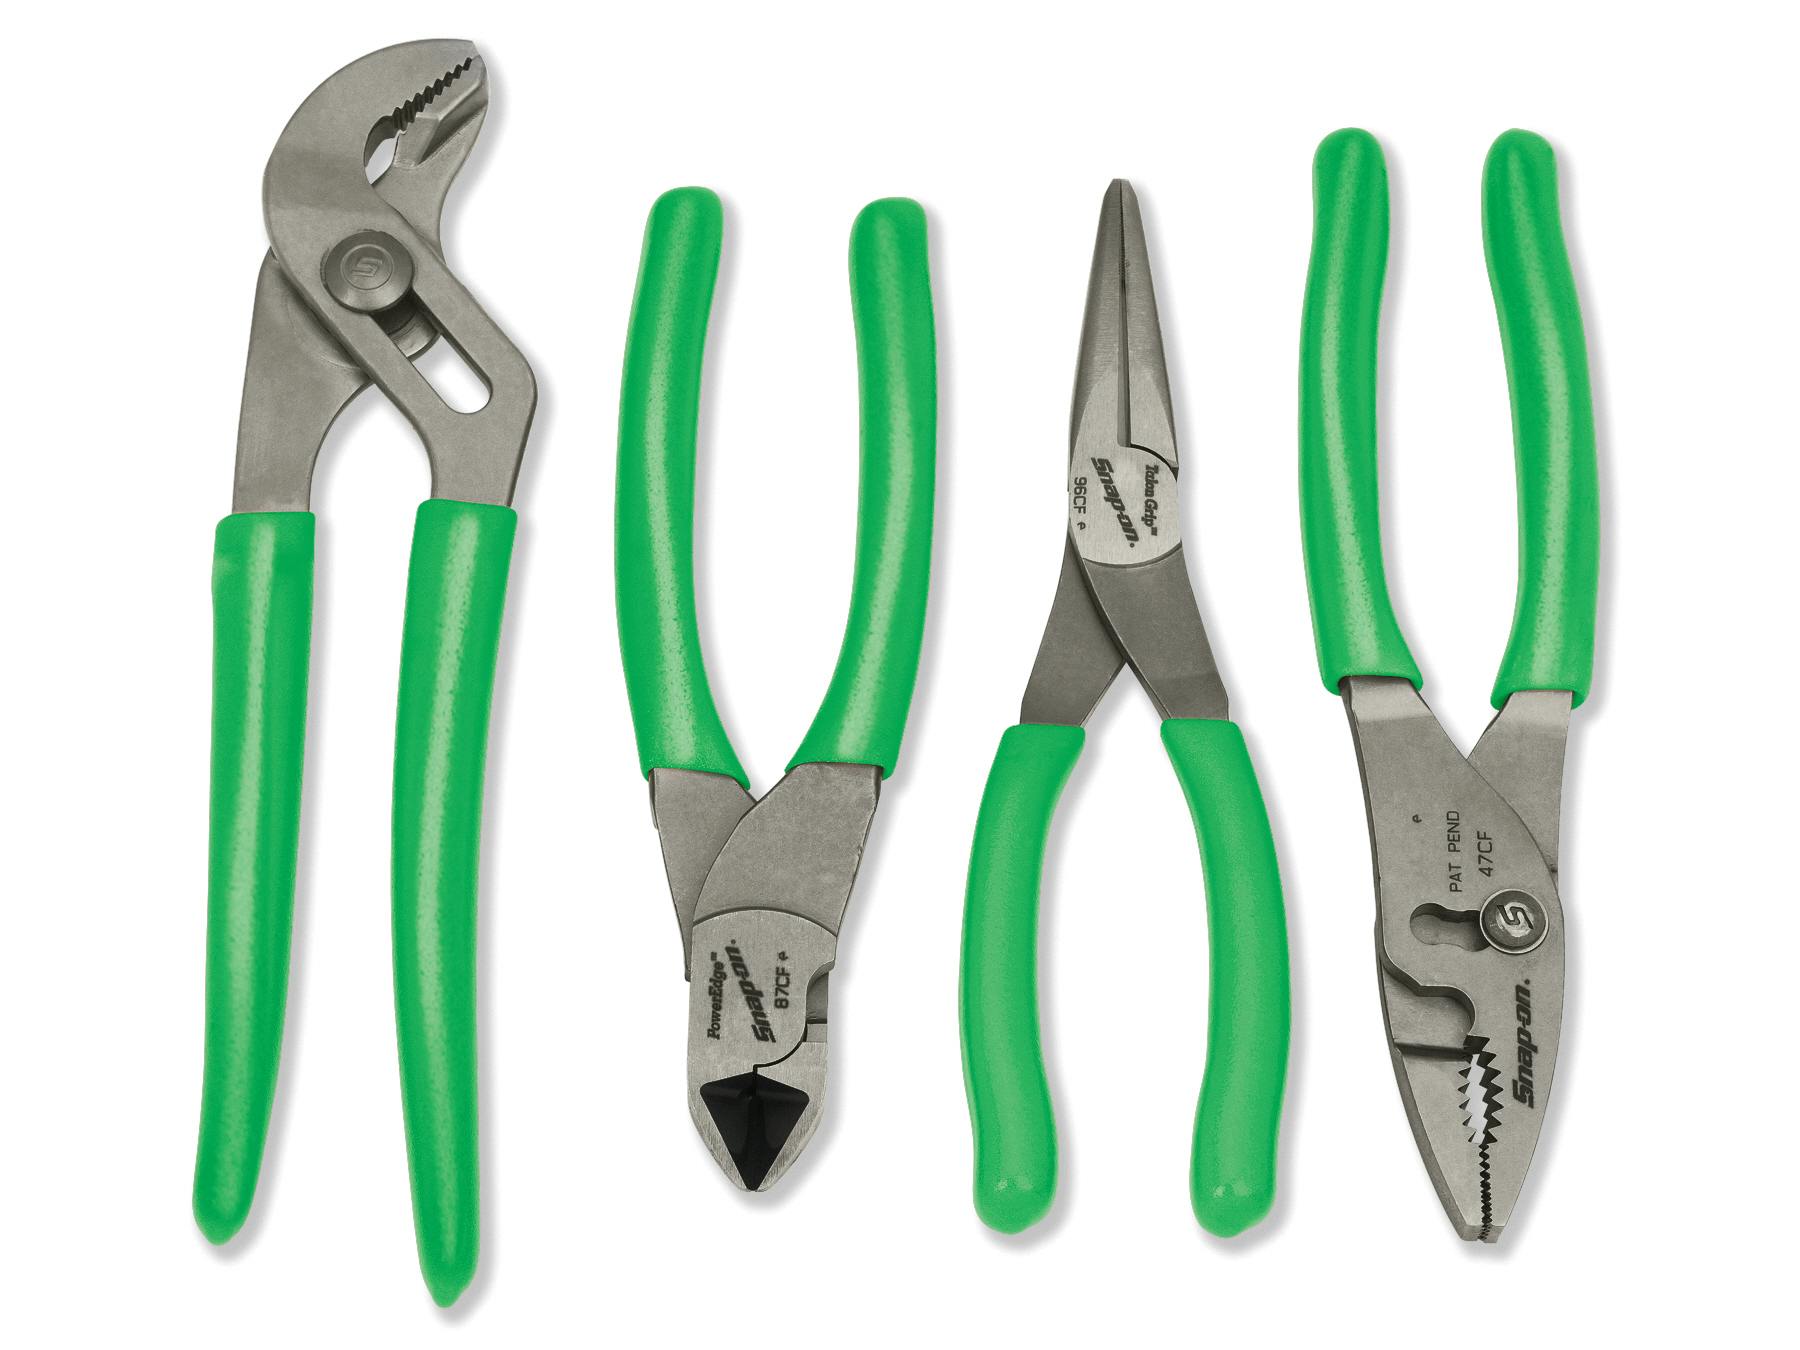 4 pc Pliers/Cutters Set (Green) | PL400BG | Snap-on Store